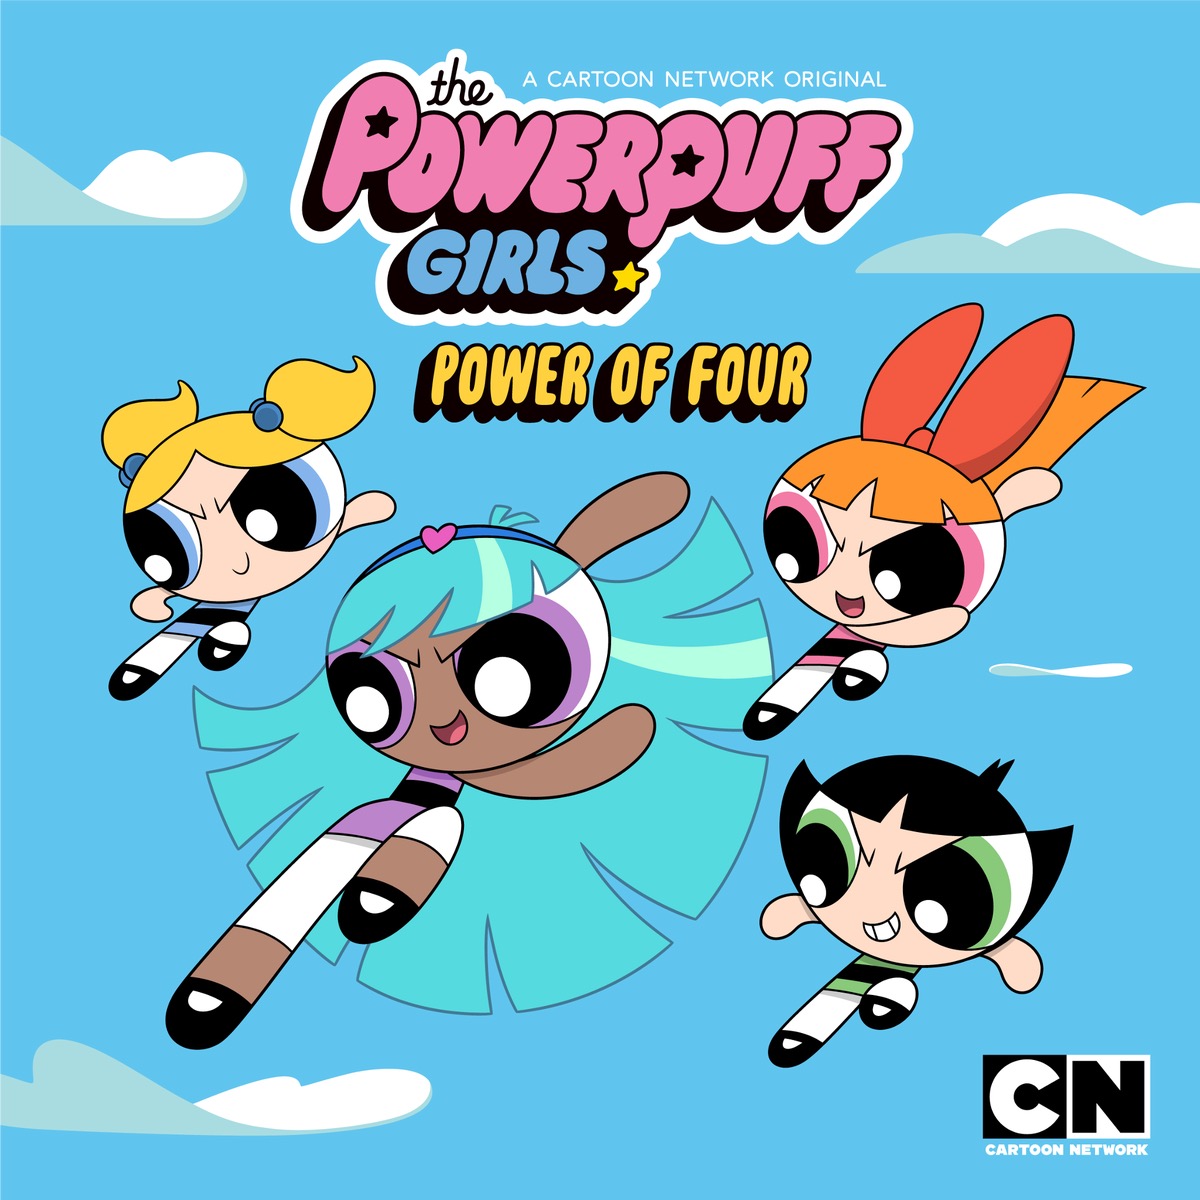 Cartoon Network shows forever: You can only watch 3? : r/FavoriteMedia